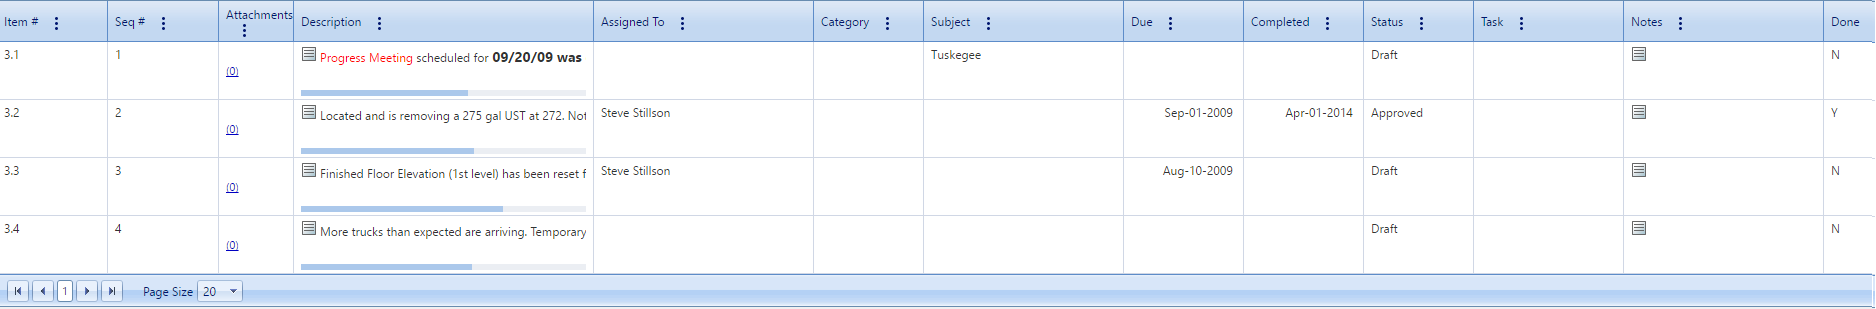 4. Meeting Minutes Details Tab Table